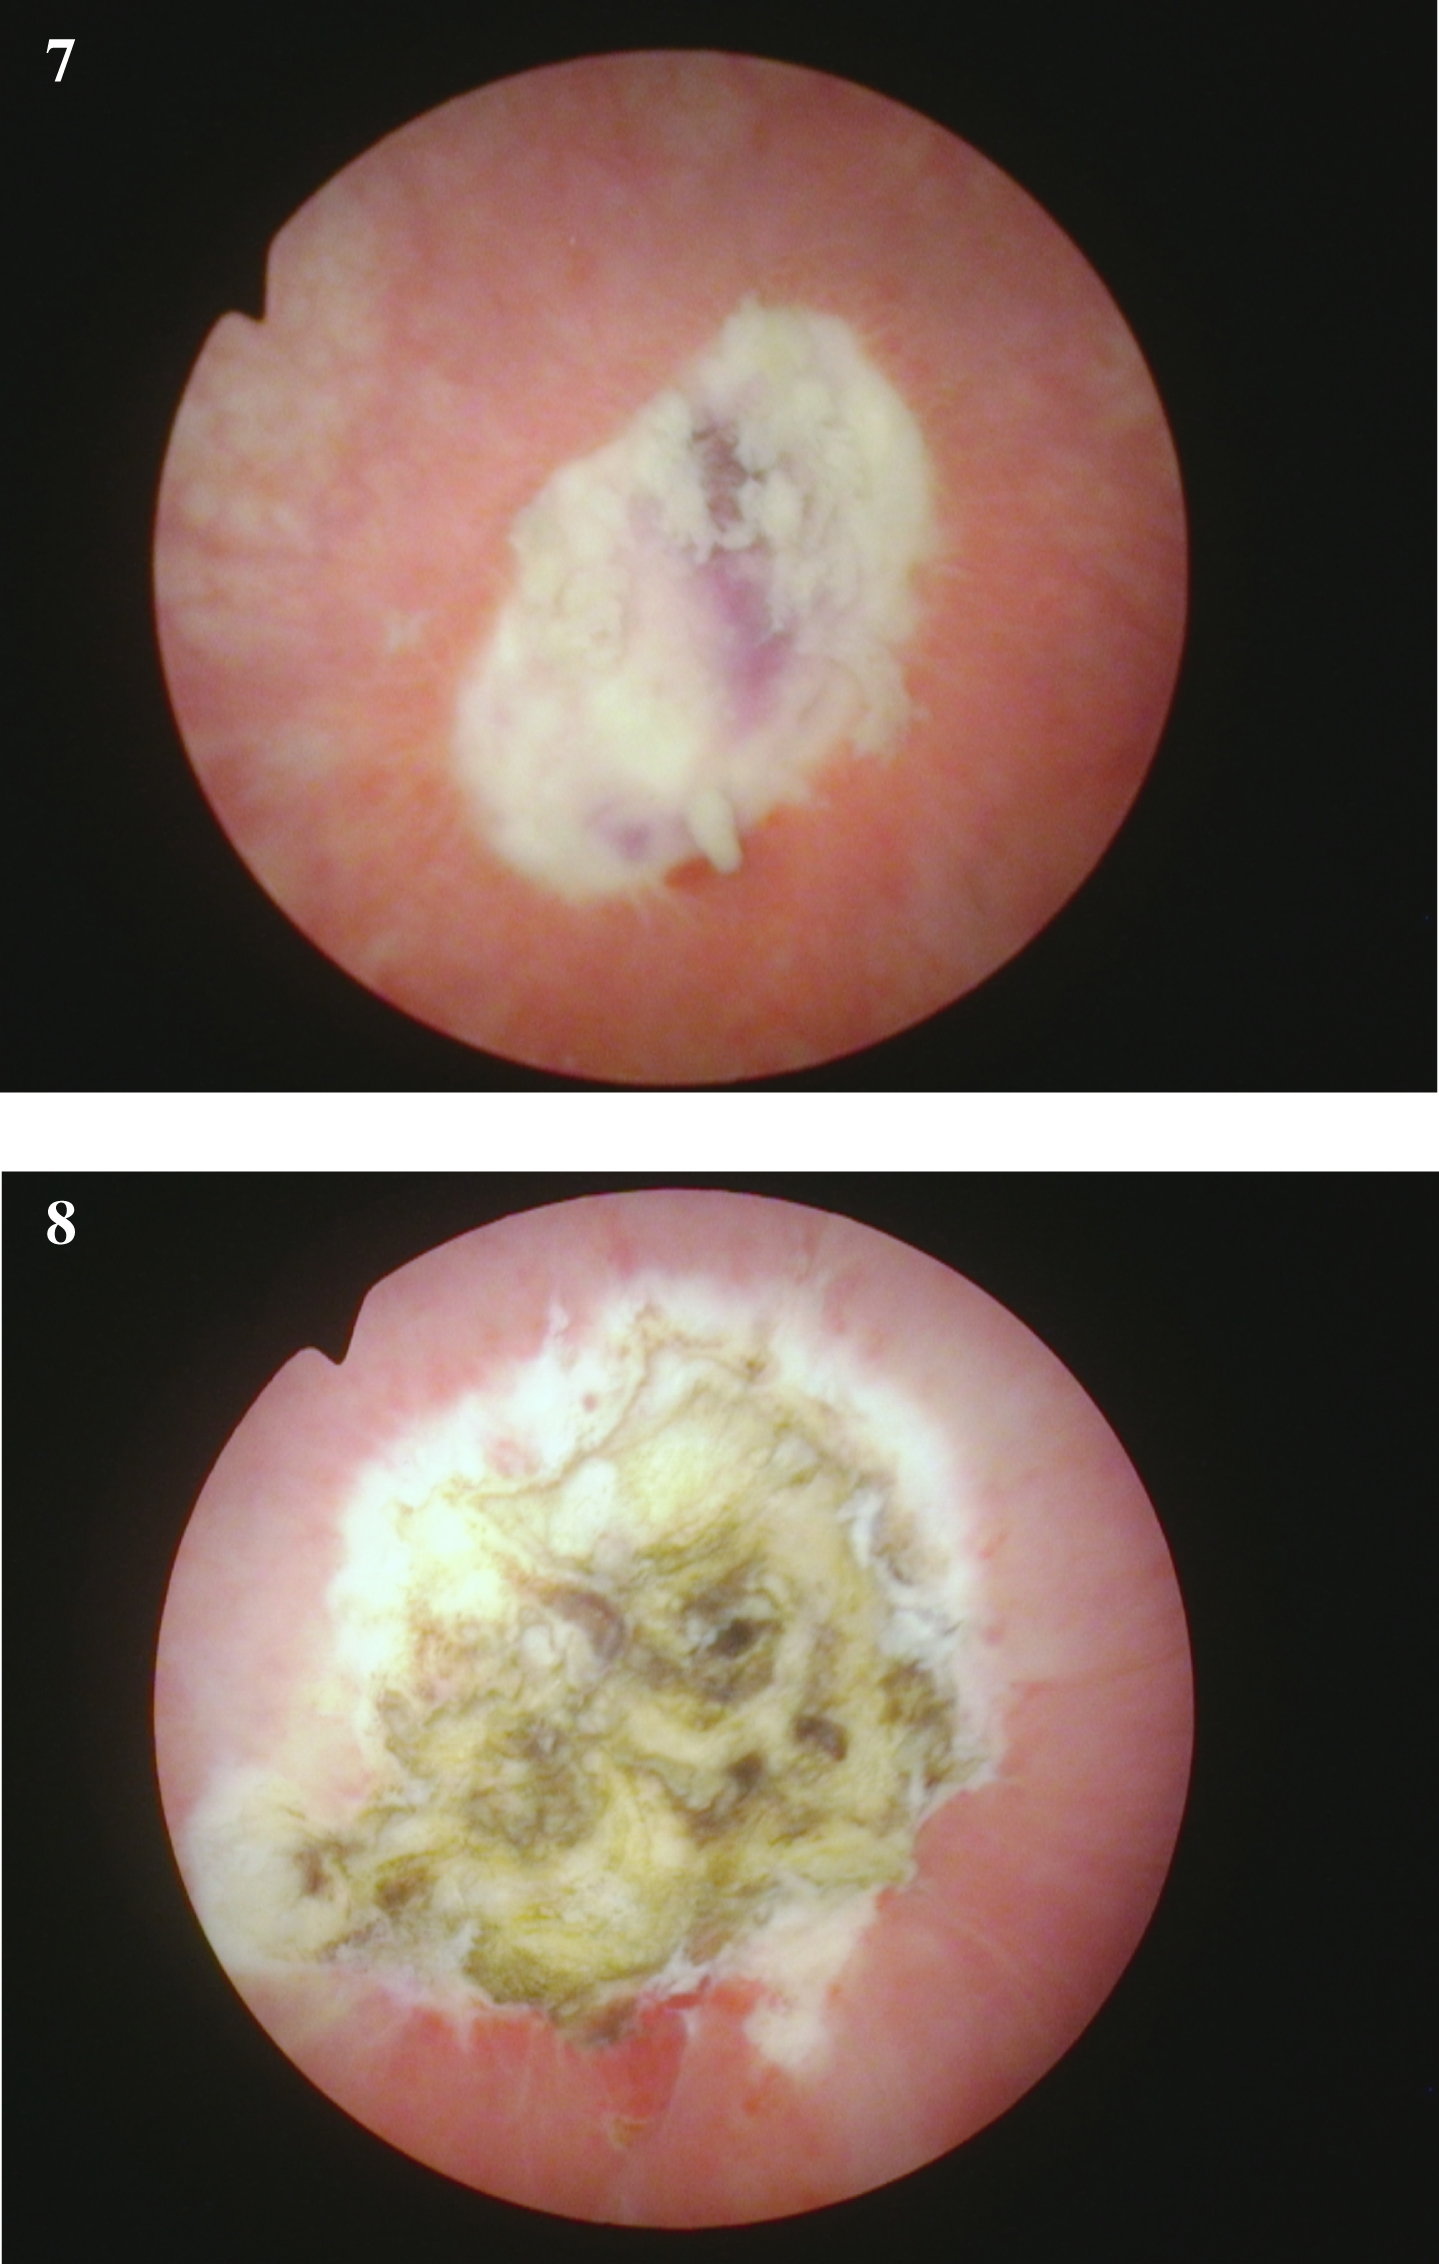 Endoscopic view at the time of the repeat TUR BT following the initial diagnosis of a of the high grade T1 urothelial cancer. The rest of the bladder was normal.